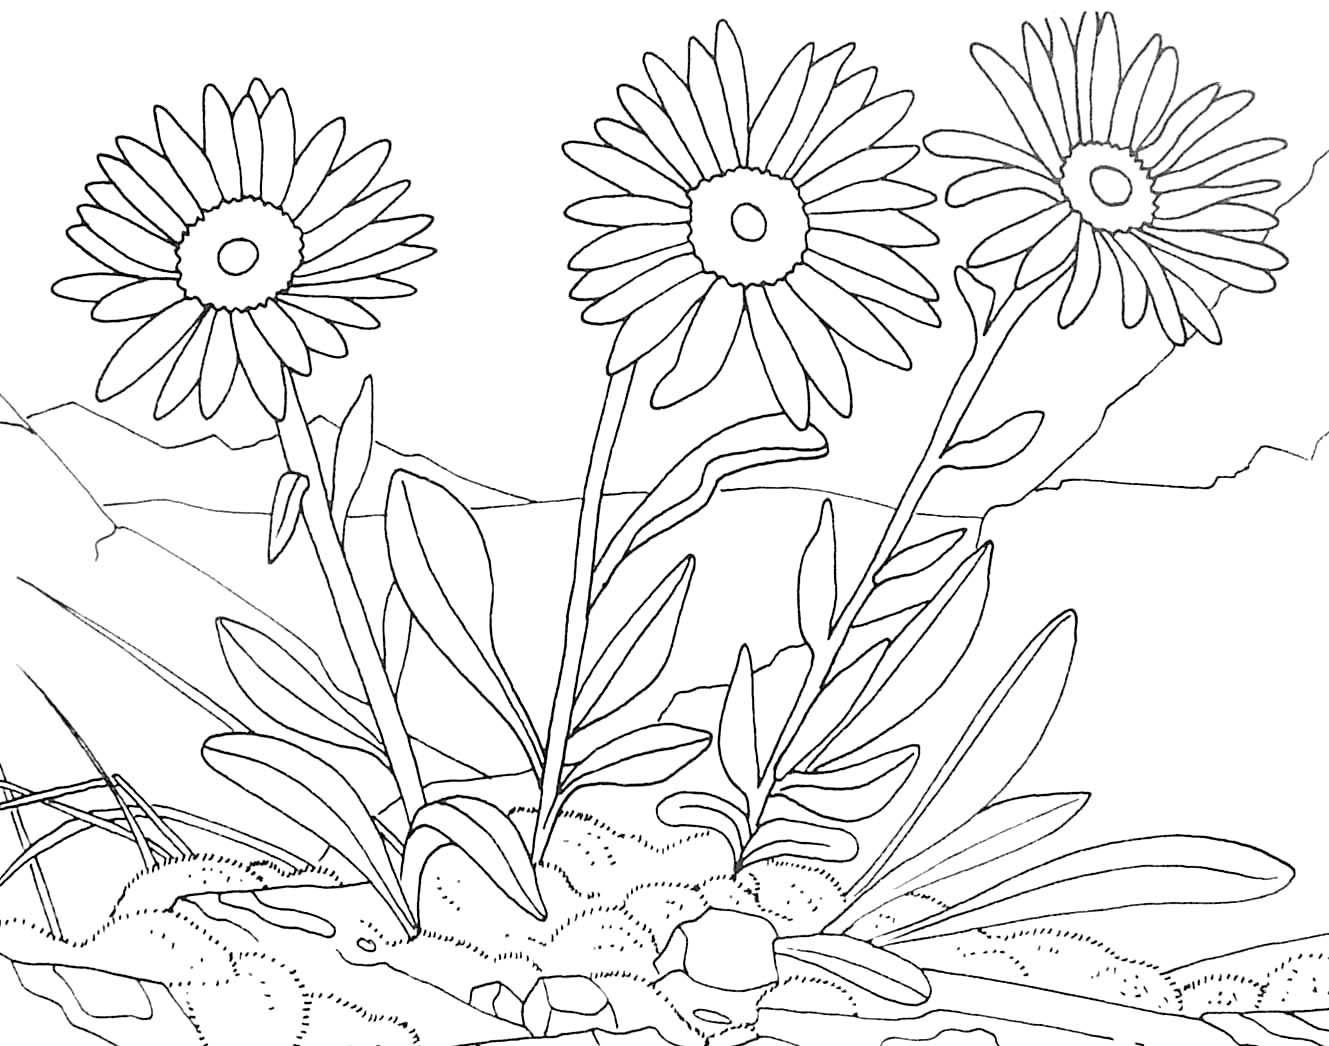 Three cute flowers to color